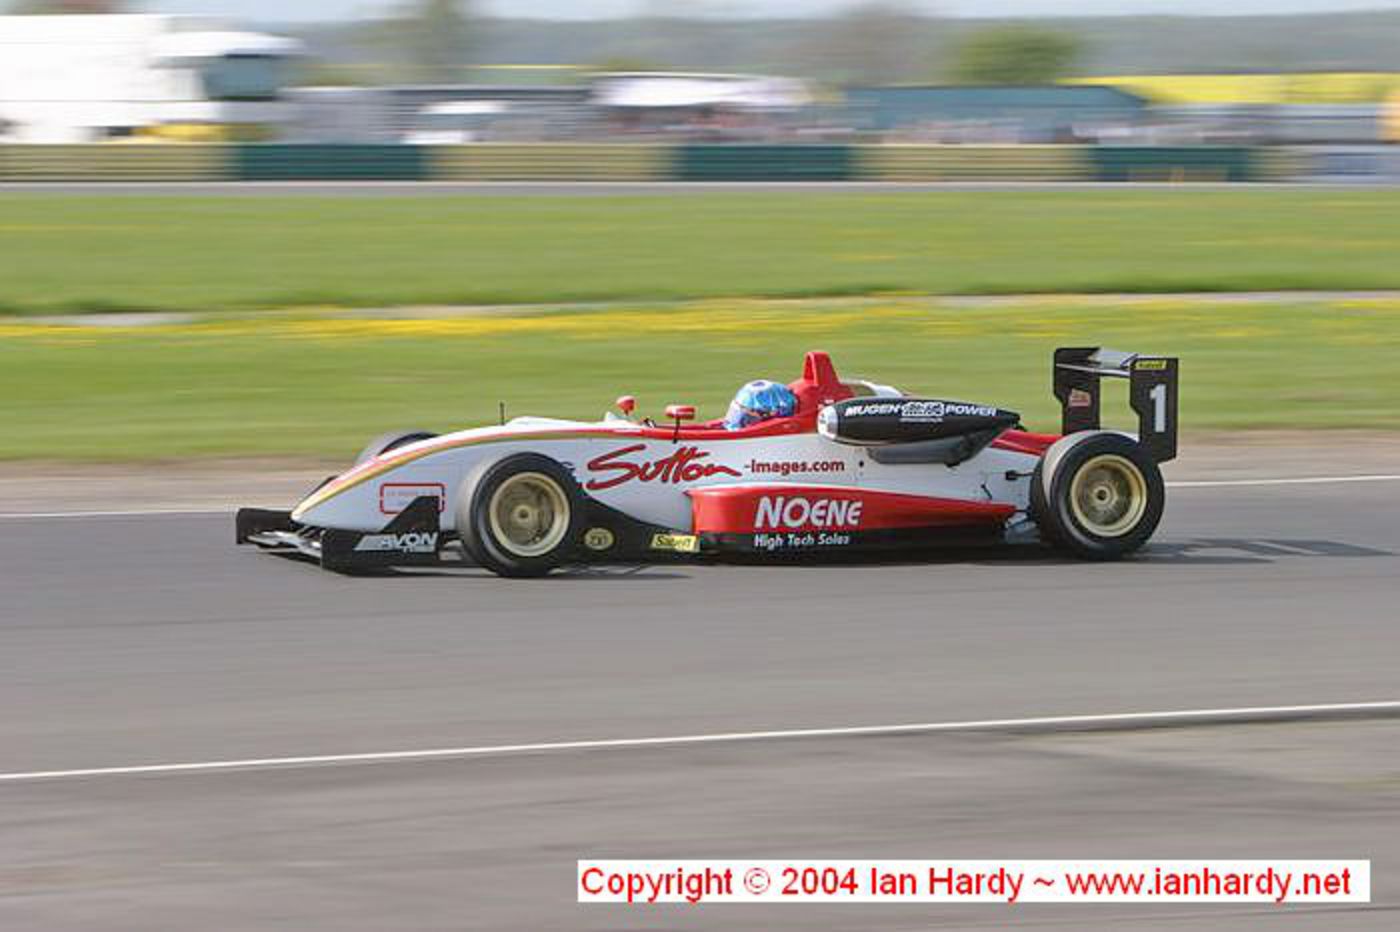 Dallara F304: Photo gallery, complete information about model ...